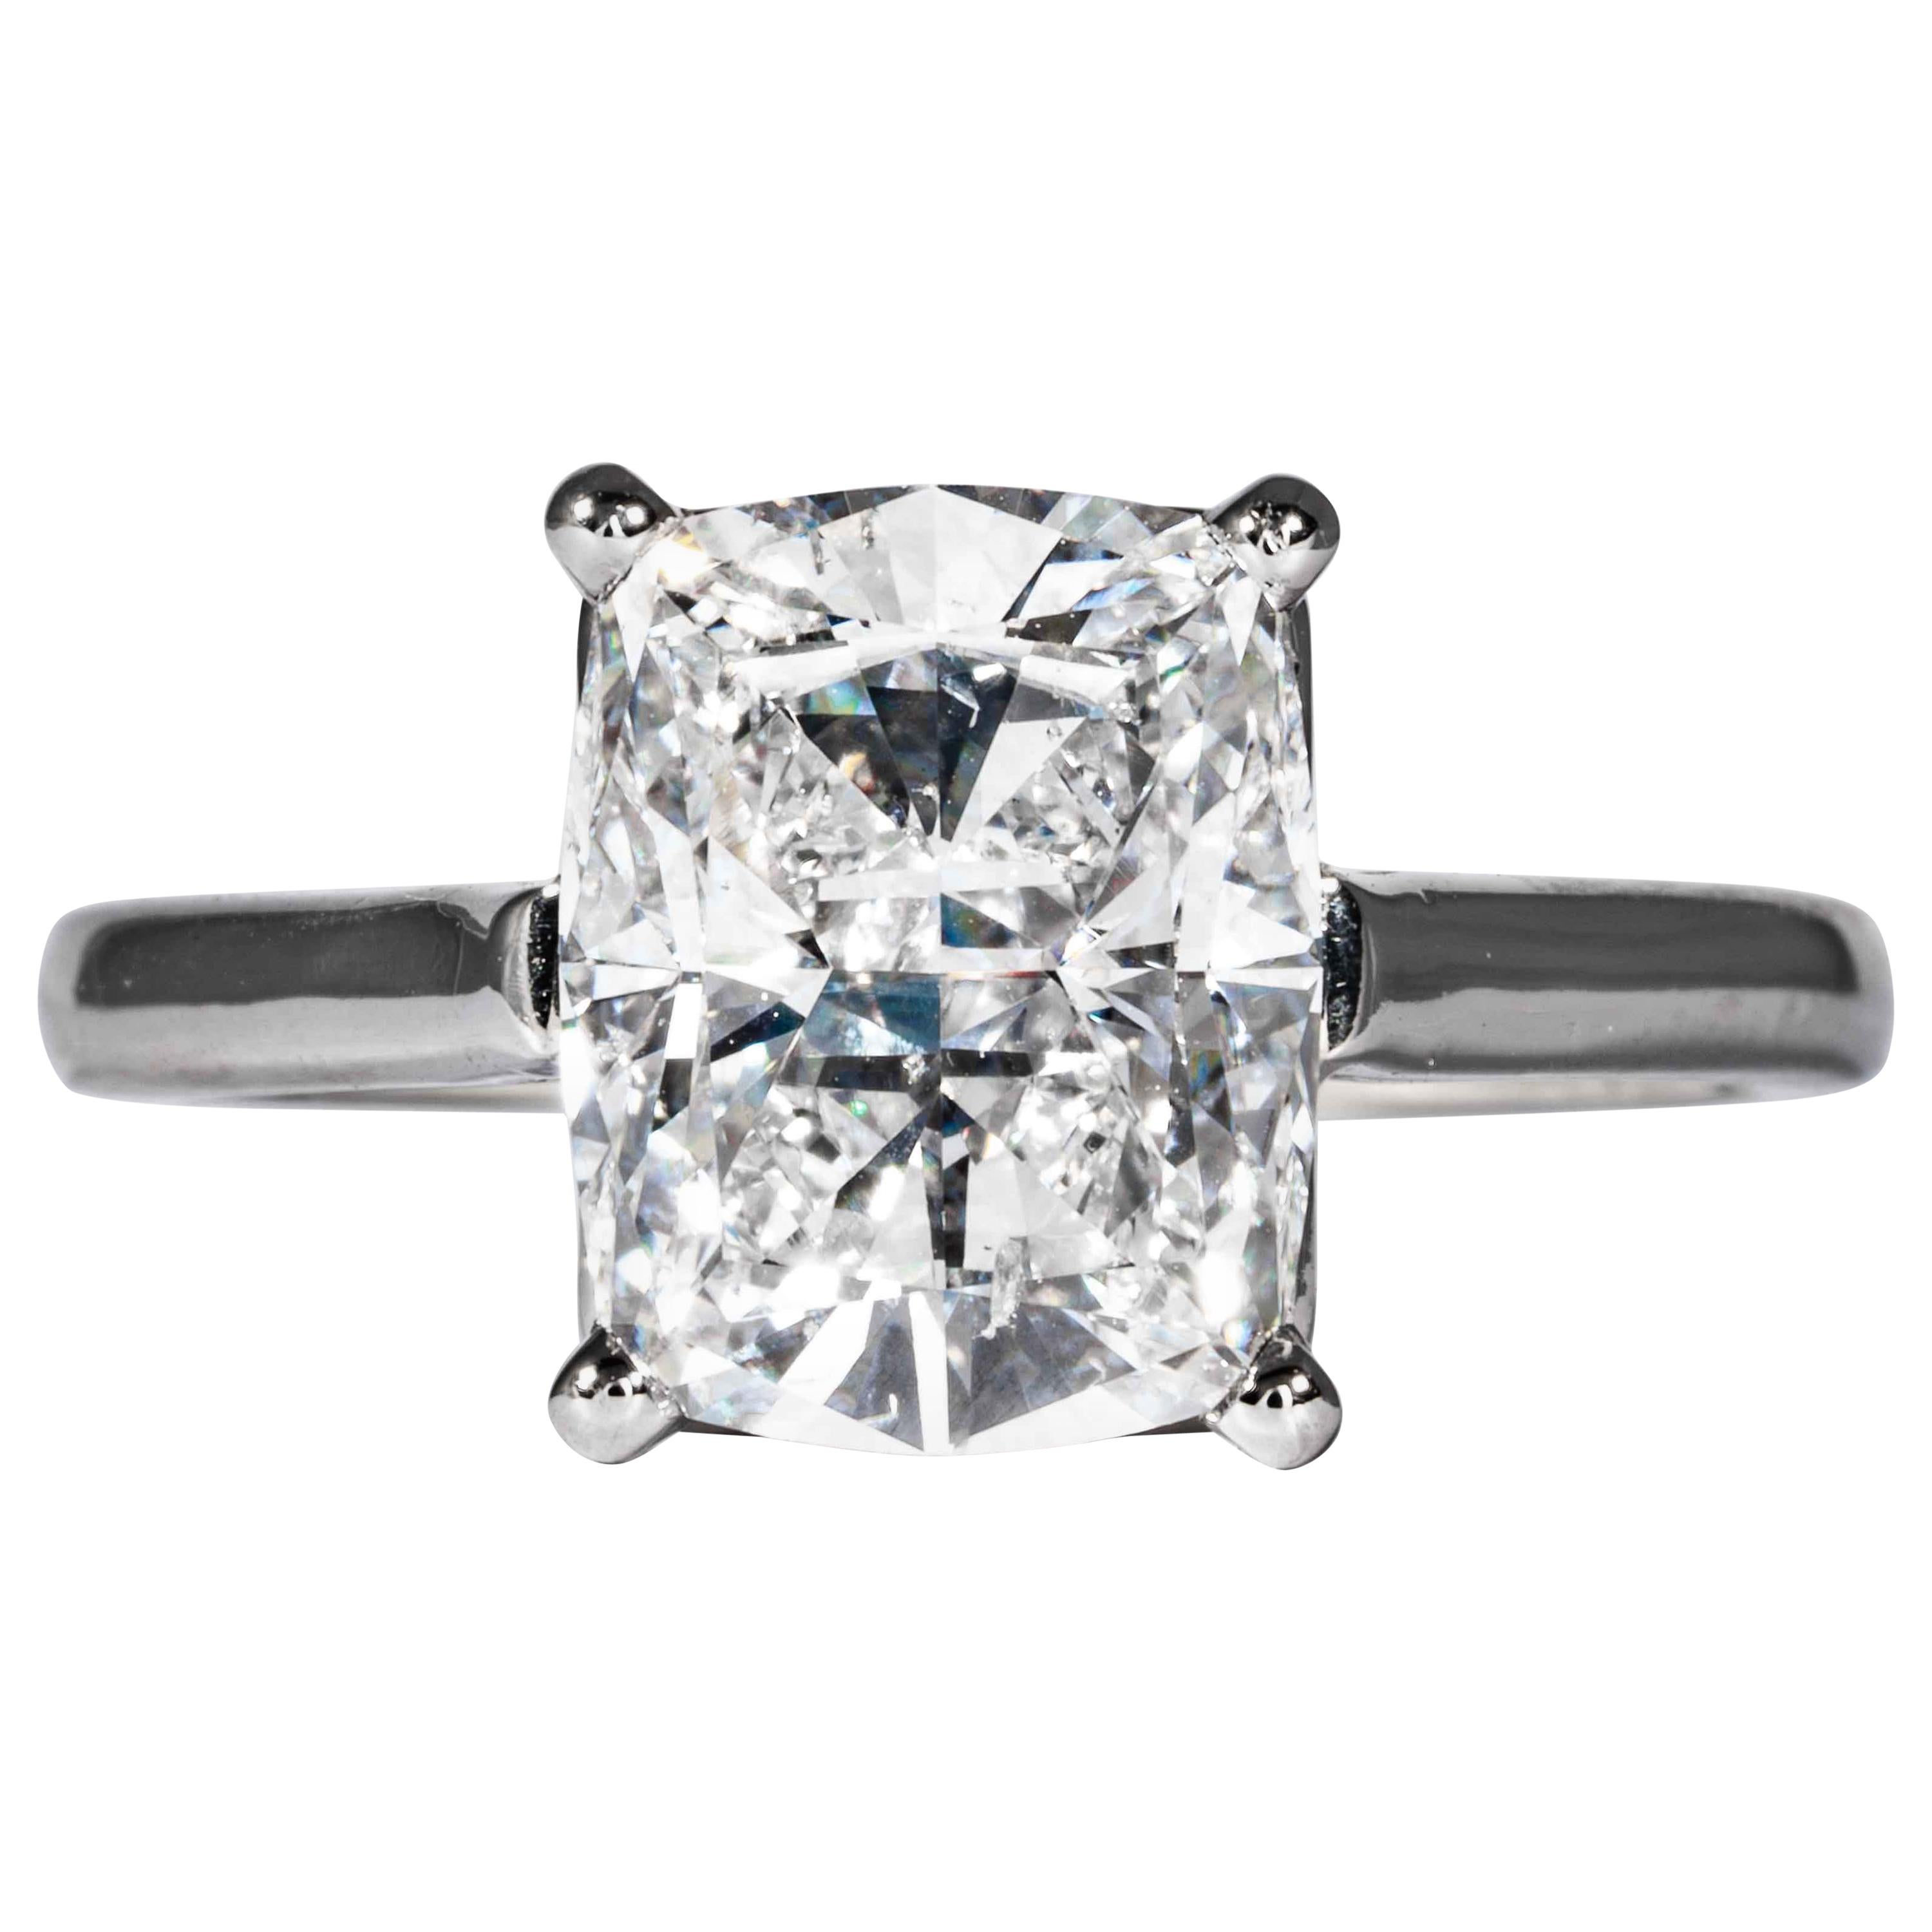 Tiffany & Co. GIA Certified 3.05 Carat D SI1 Cushion Cut Diamond Solitaire Ring